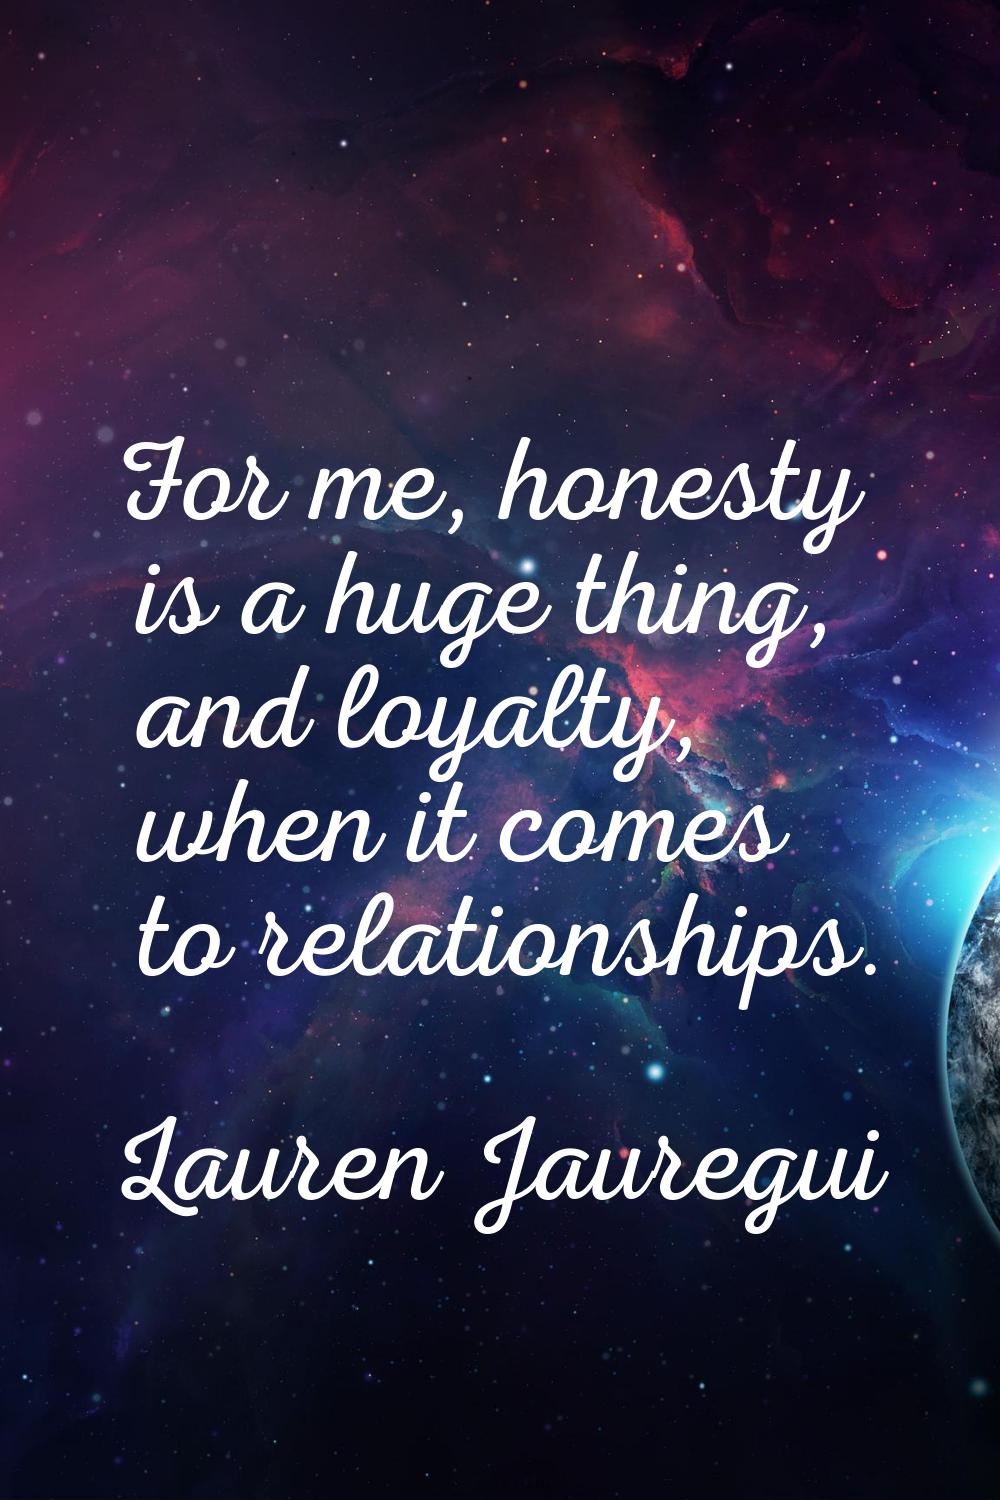 For me, honesty is a huge thing, and loyalty, when it comes to relationships.